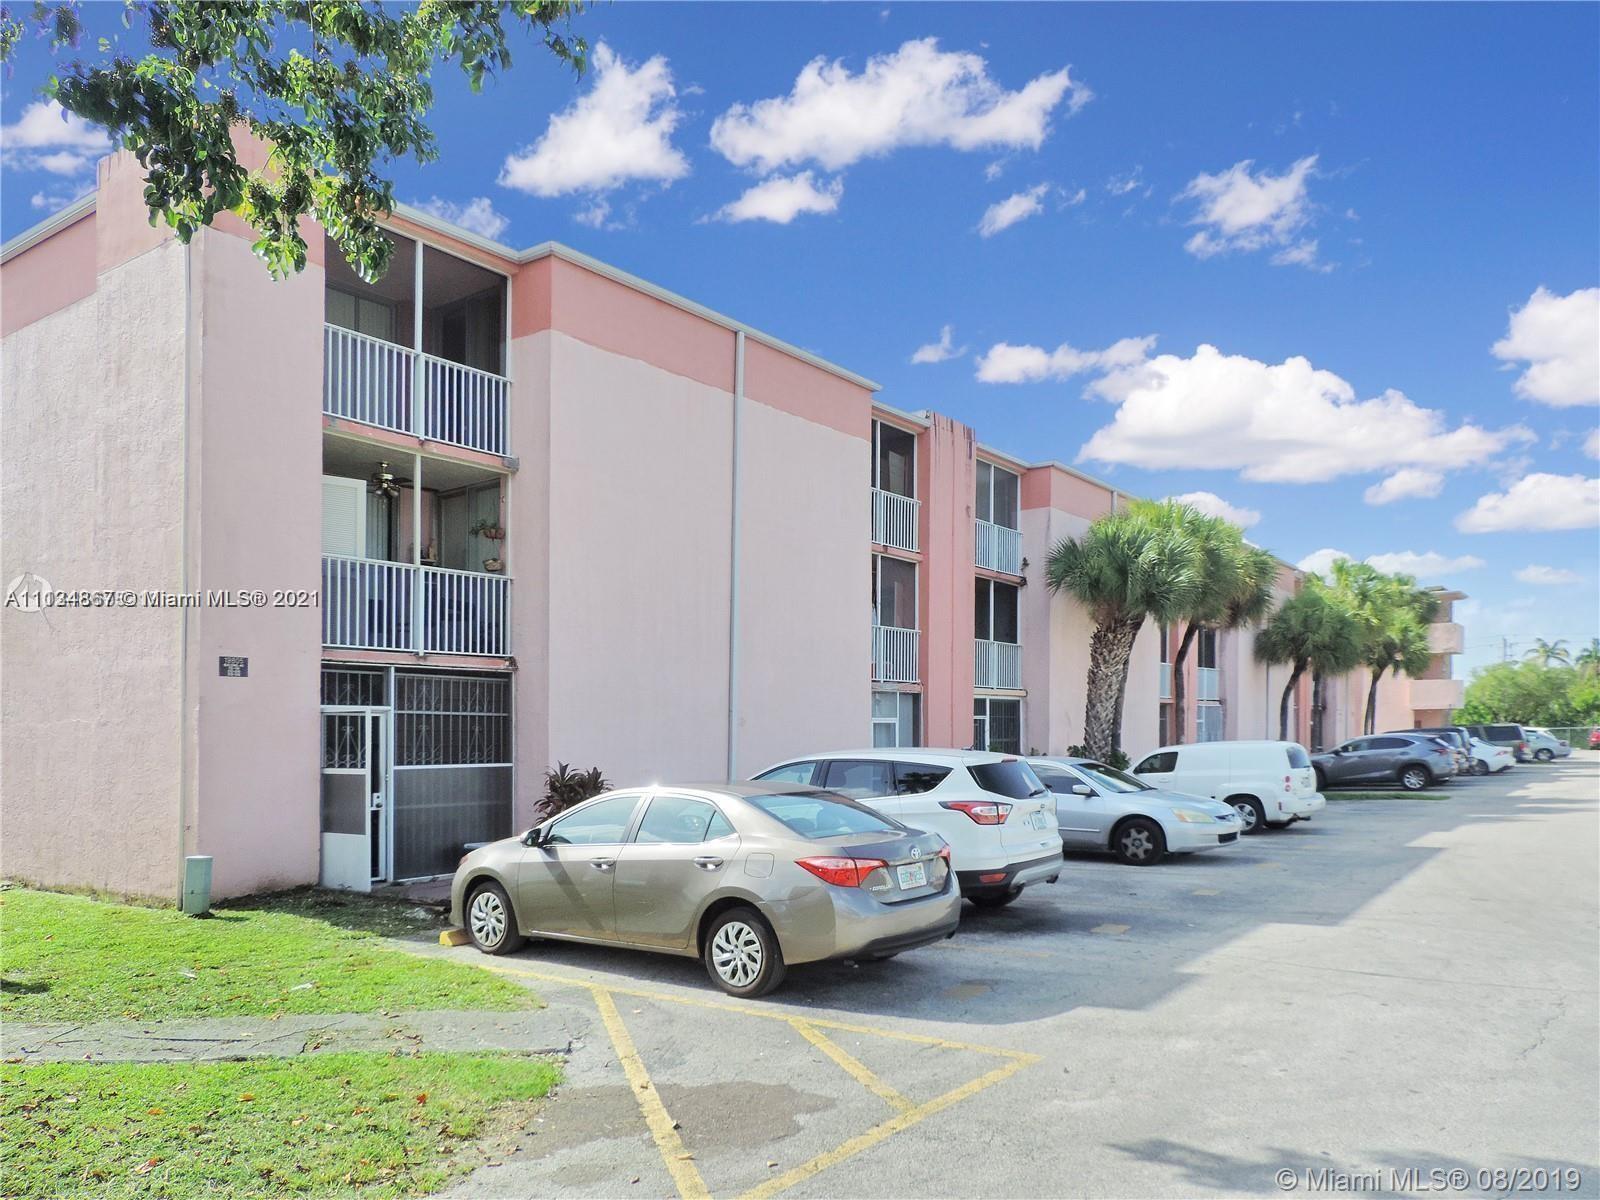 Great for investors 2/2 800 SQ FT, Tile throughout with a balcony and storage room west of US 1 high demand rental area. A+ tenants at $1,300.00 with a last and security deposit.